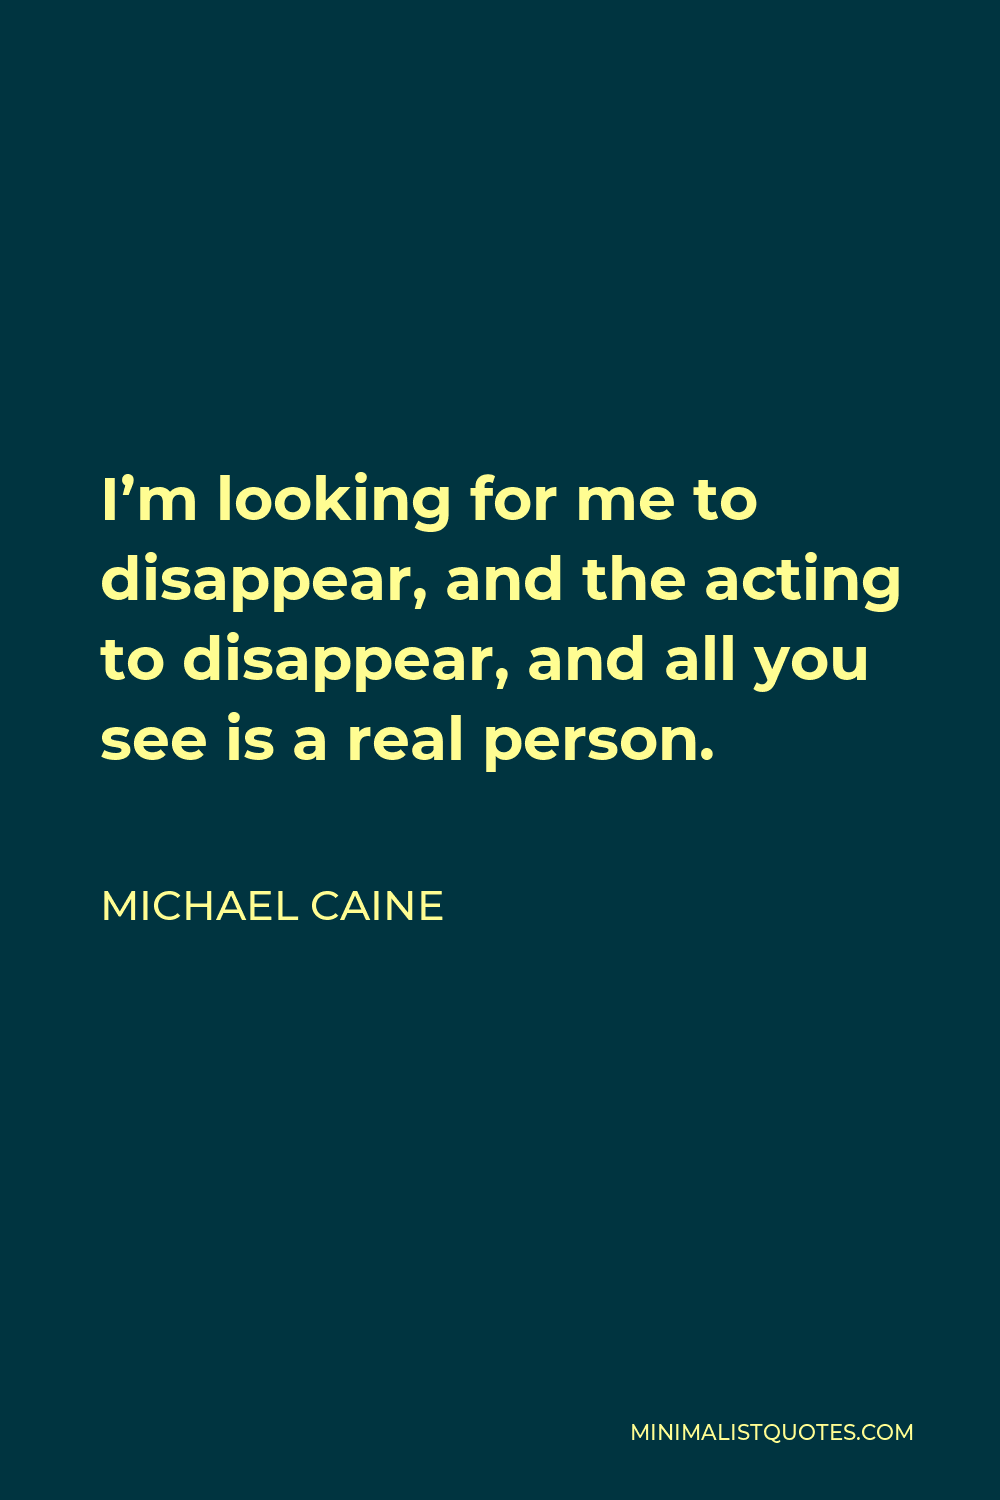 Michael Caine Quote - I’m looking for me to disappear, and the acting to disappear, and all you see is a real person.